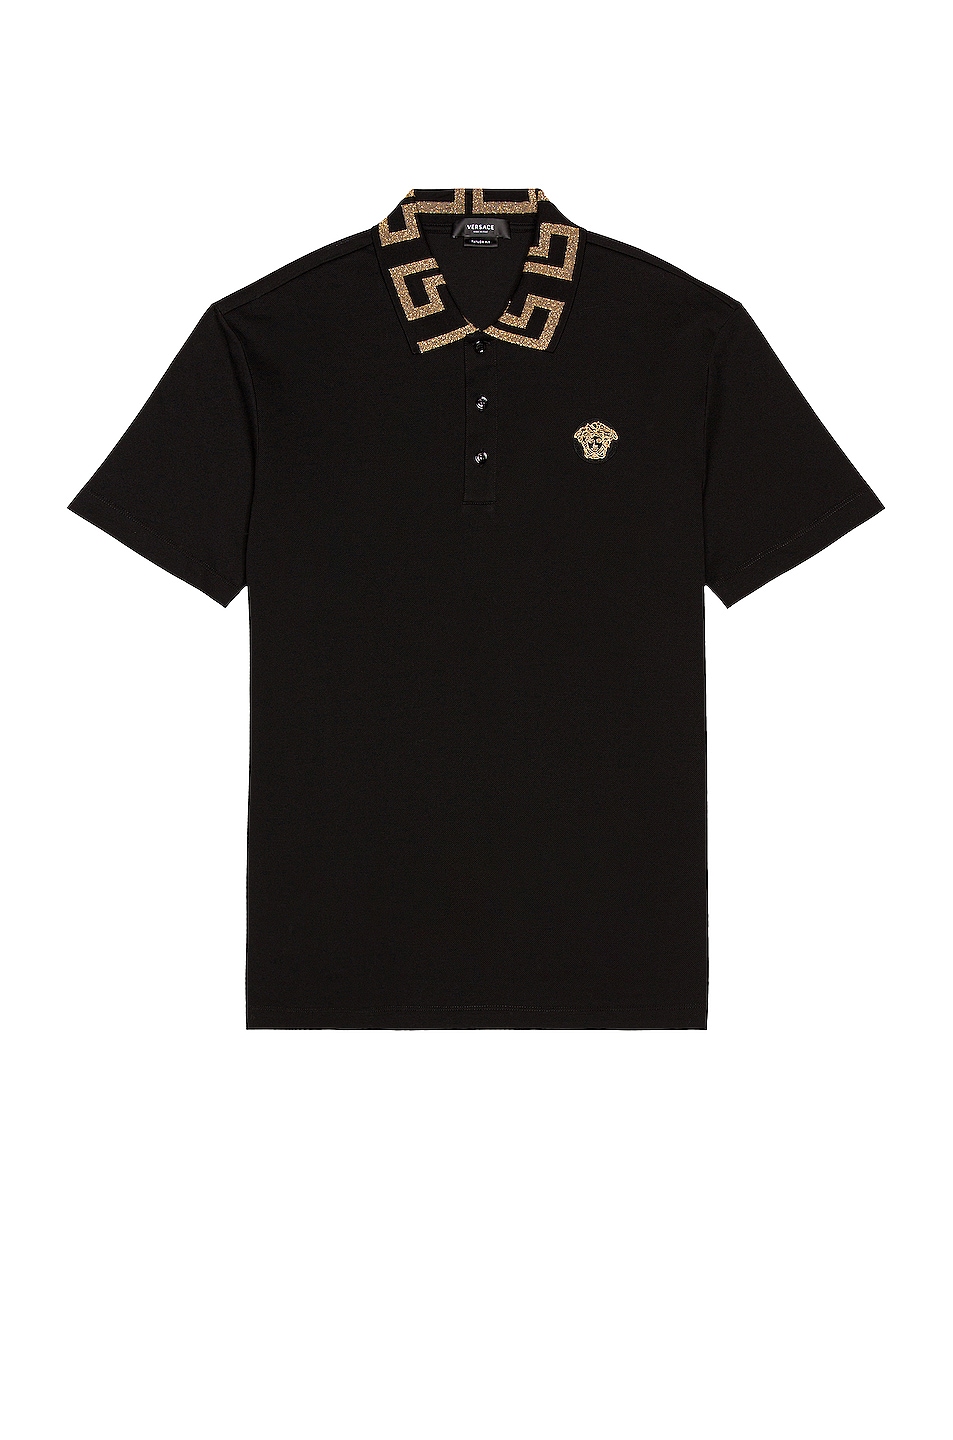 VERSACE Taylor Fit Polo in Black | FWRD